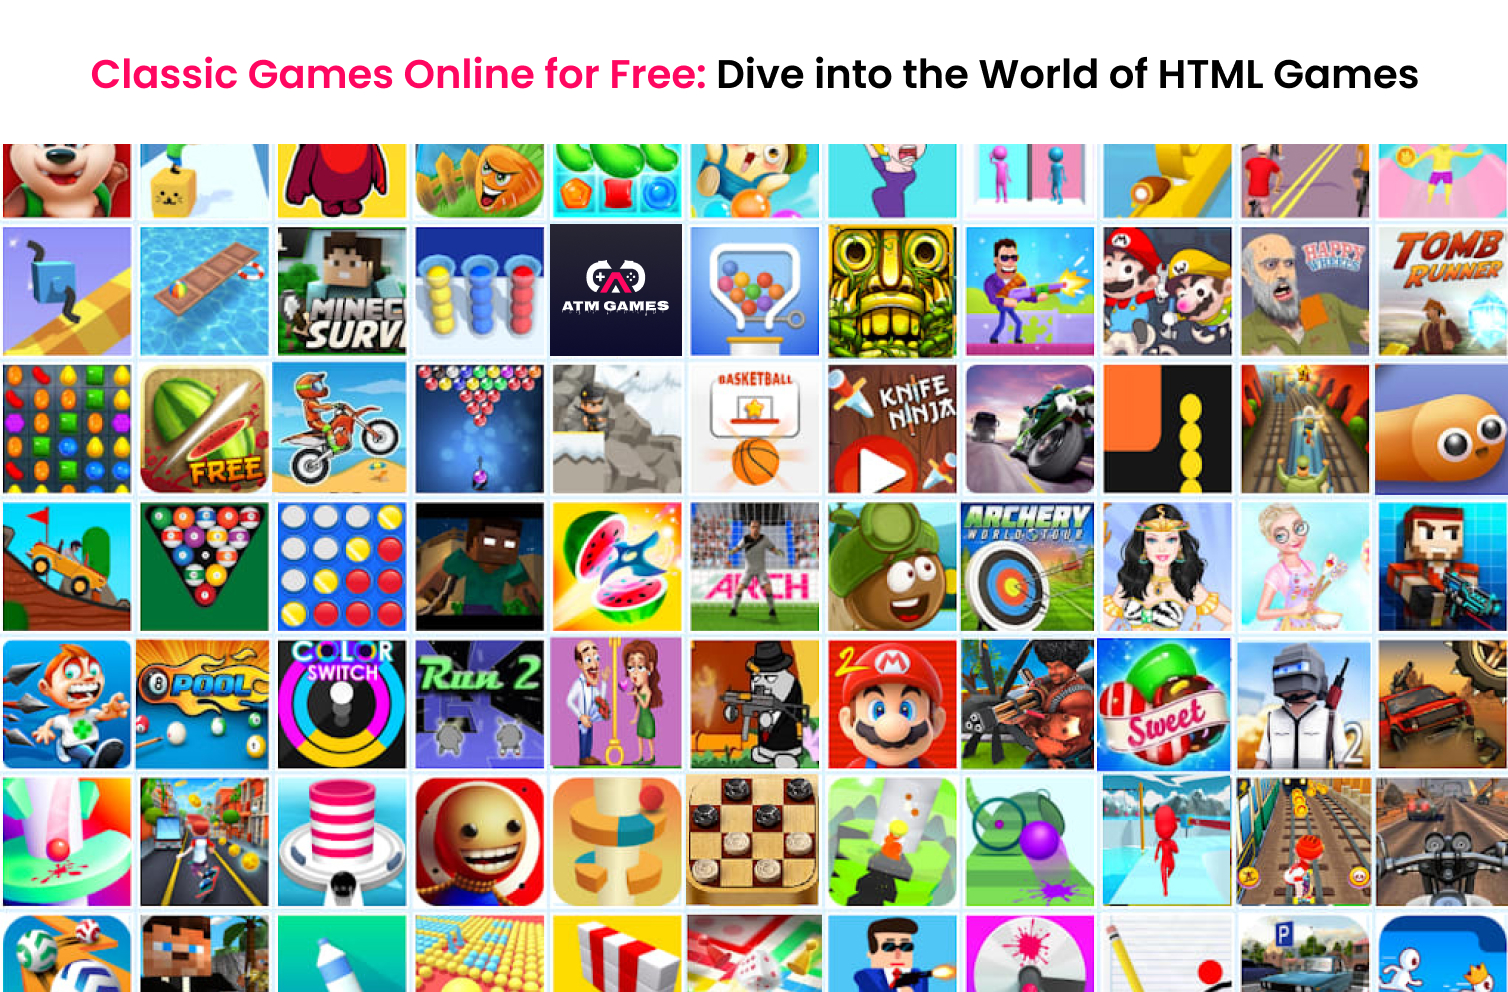 Classic Games Online for Free: Dive into the World of HTML Games